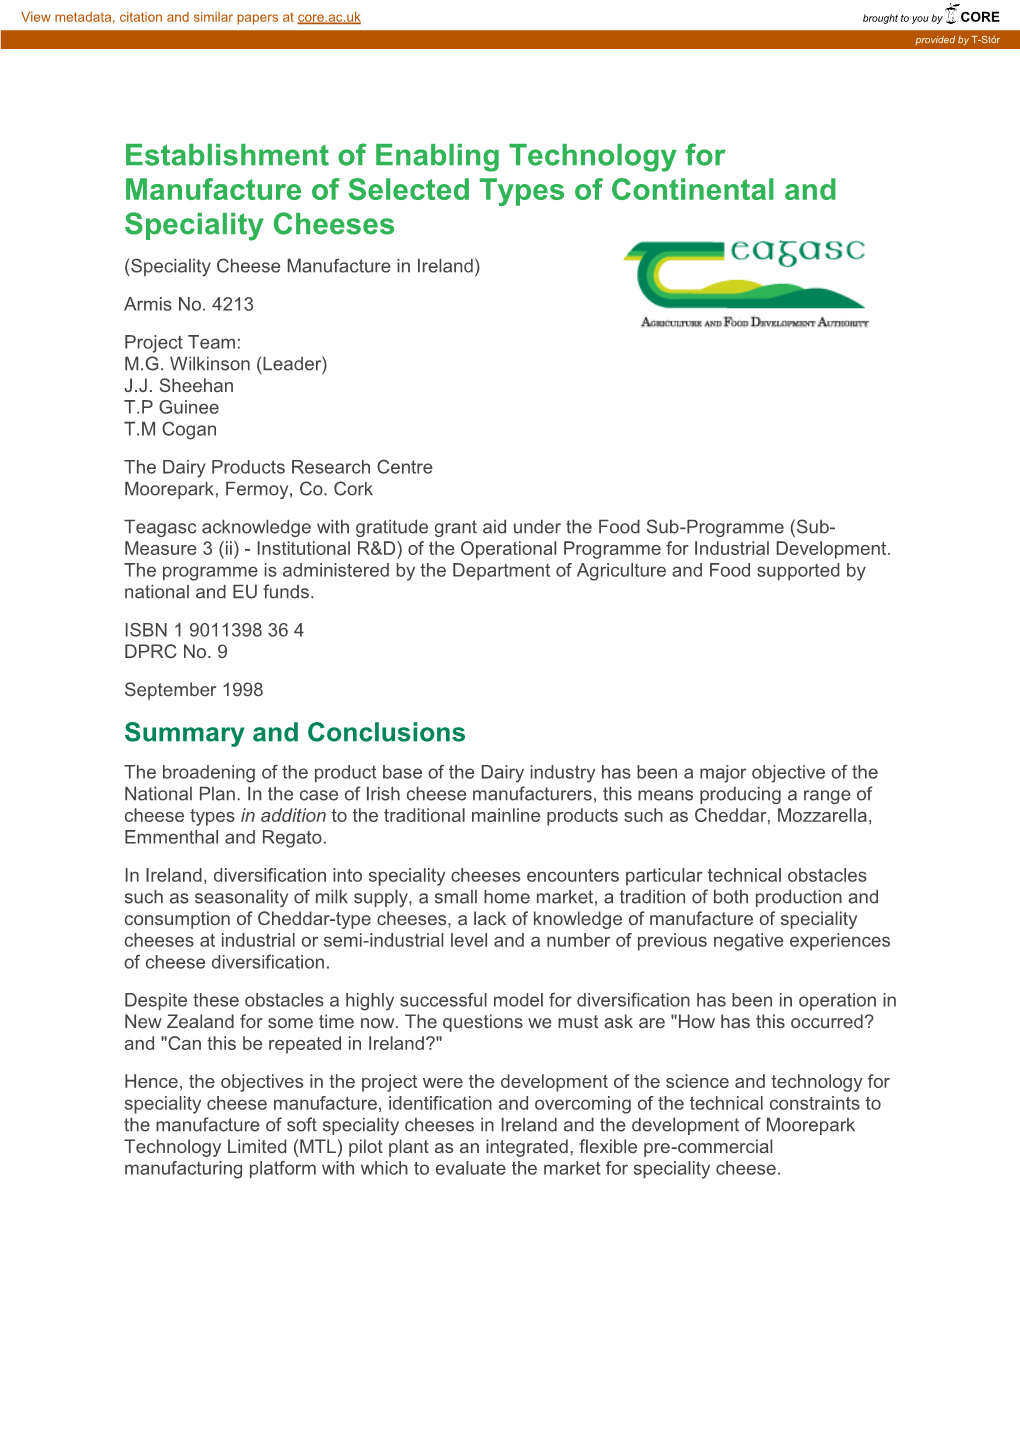 Establishment of Enabling Technology for Manufacture of Selected Types of Continental and Speciality Cheeses (Speciality Cheese Manufacture in Ireland)